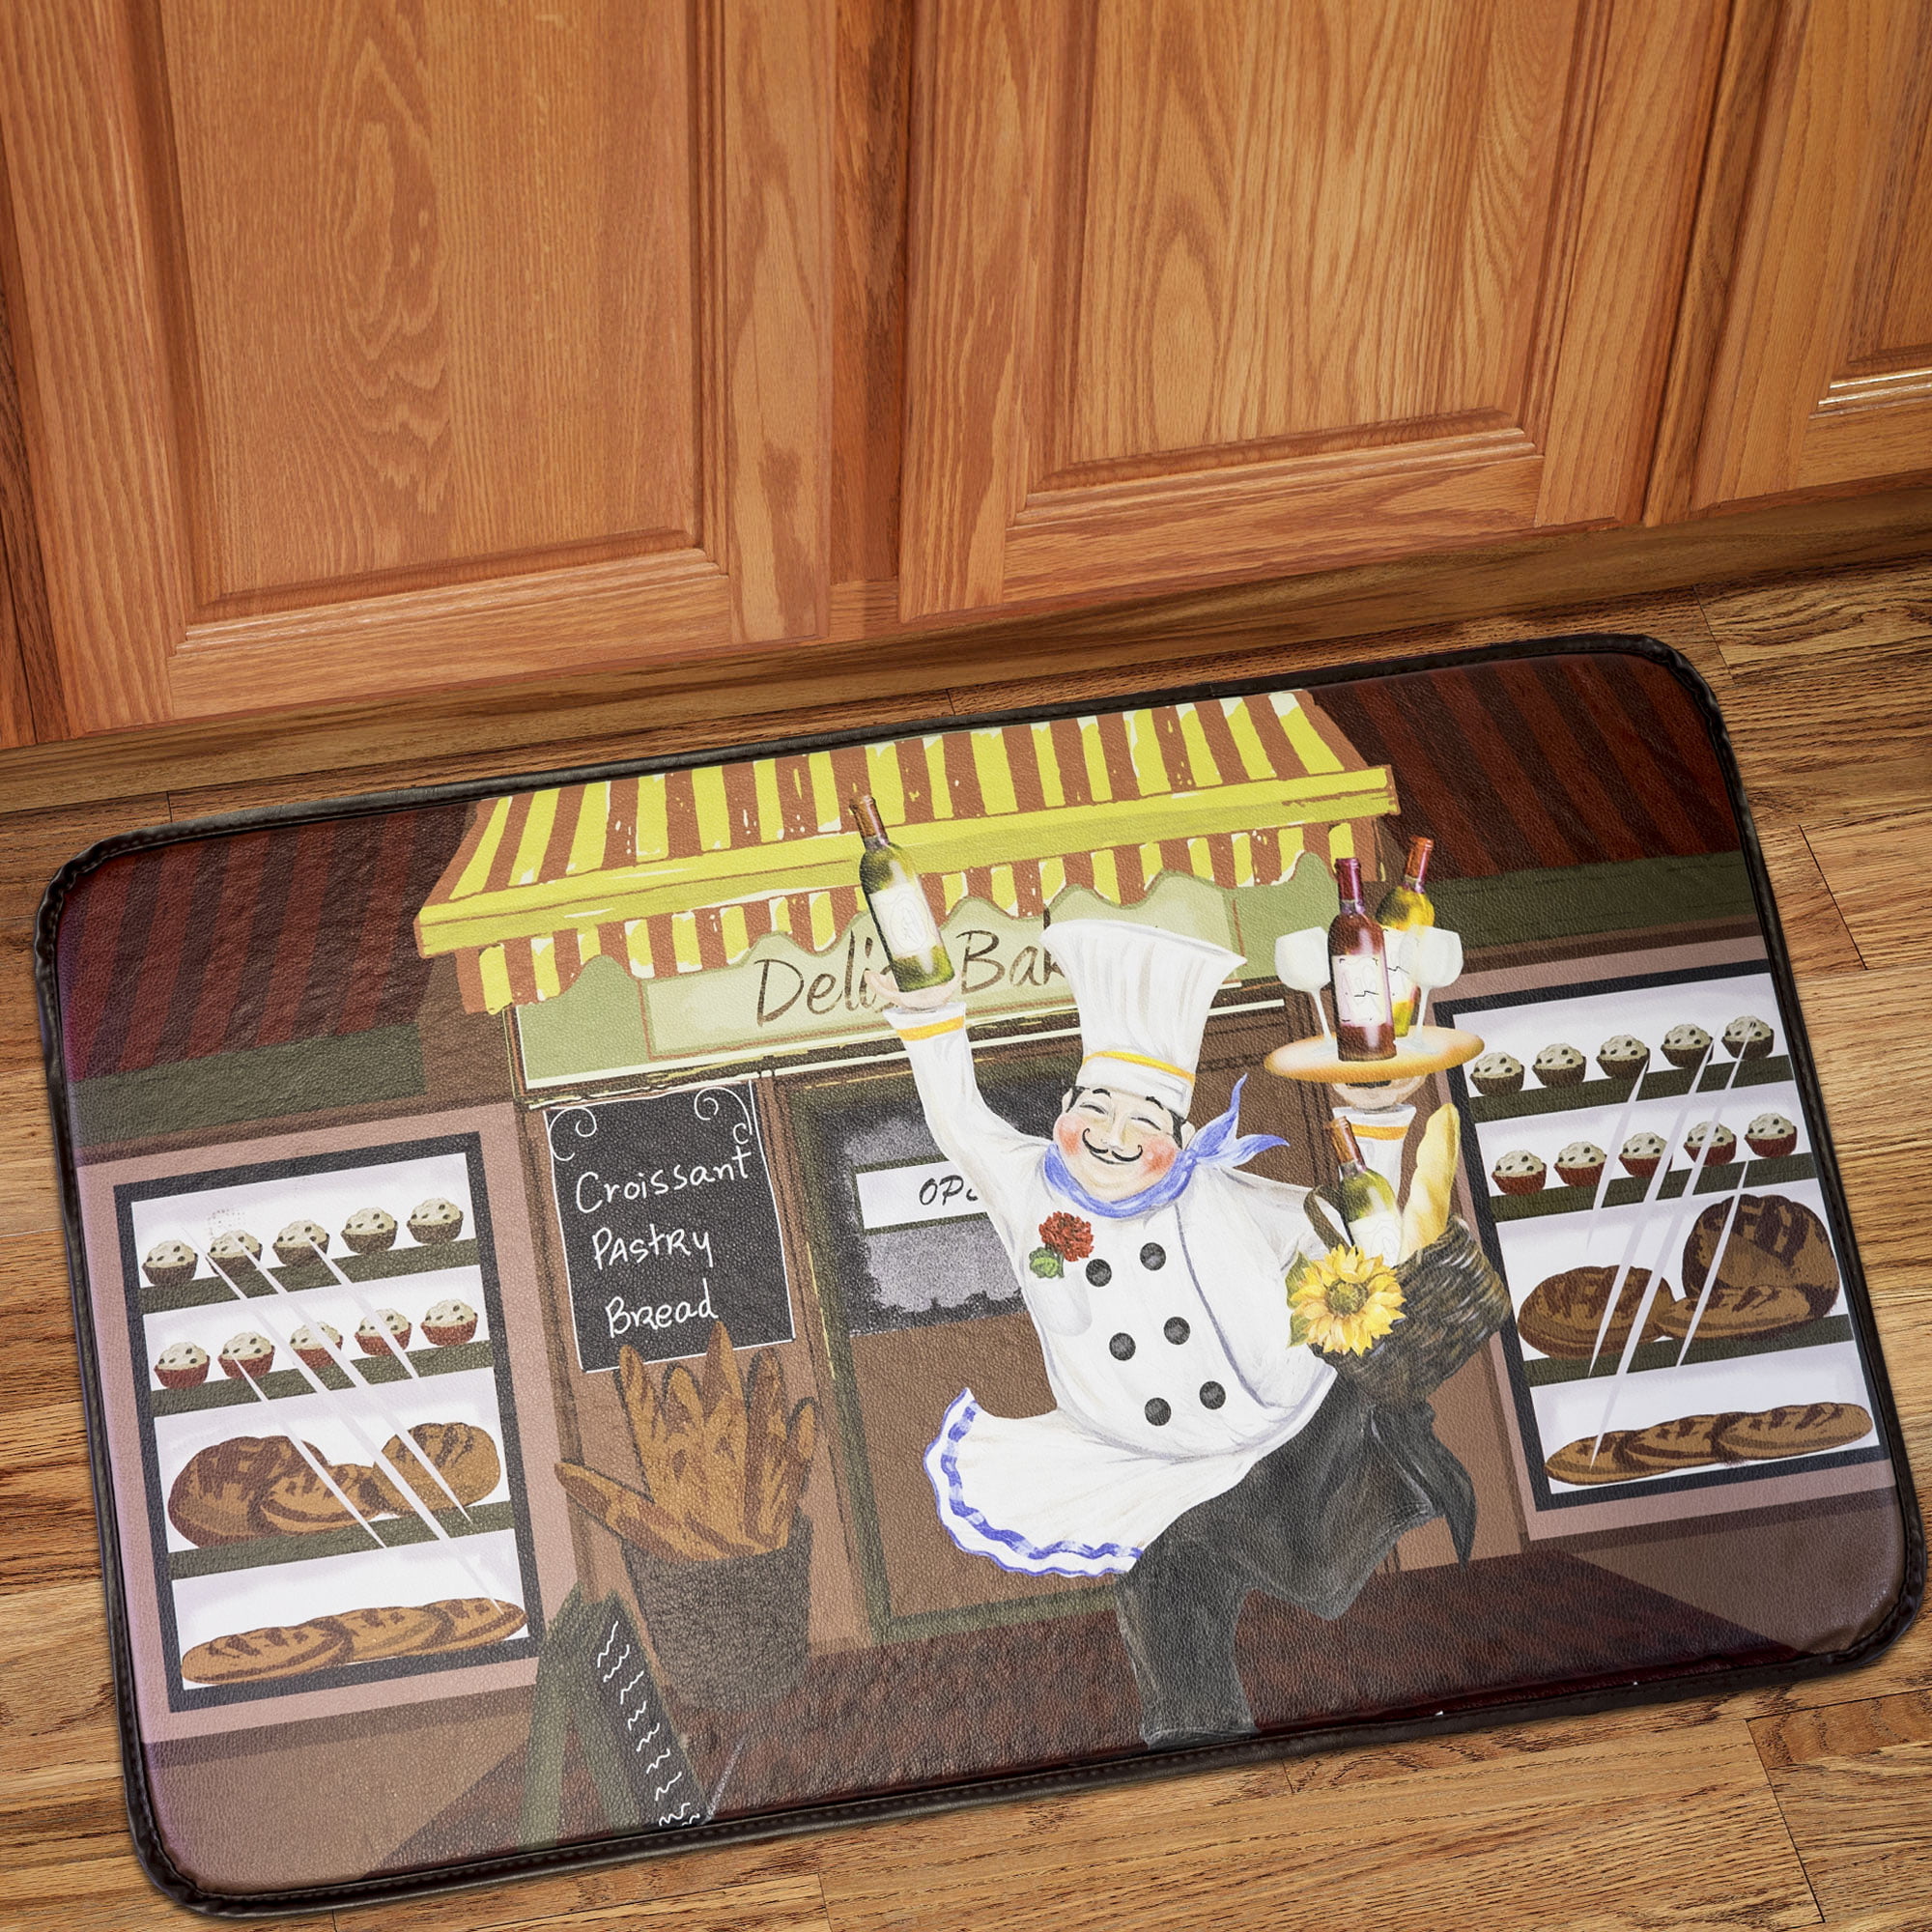 PVC 18"x30" ANTI-FATIGUE NON SLIP FLOOR MAT ROOSTER # 1 by Master Chef 